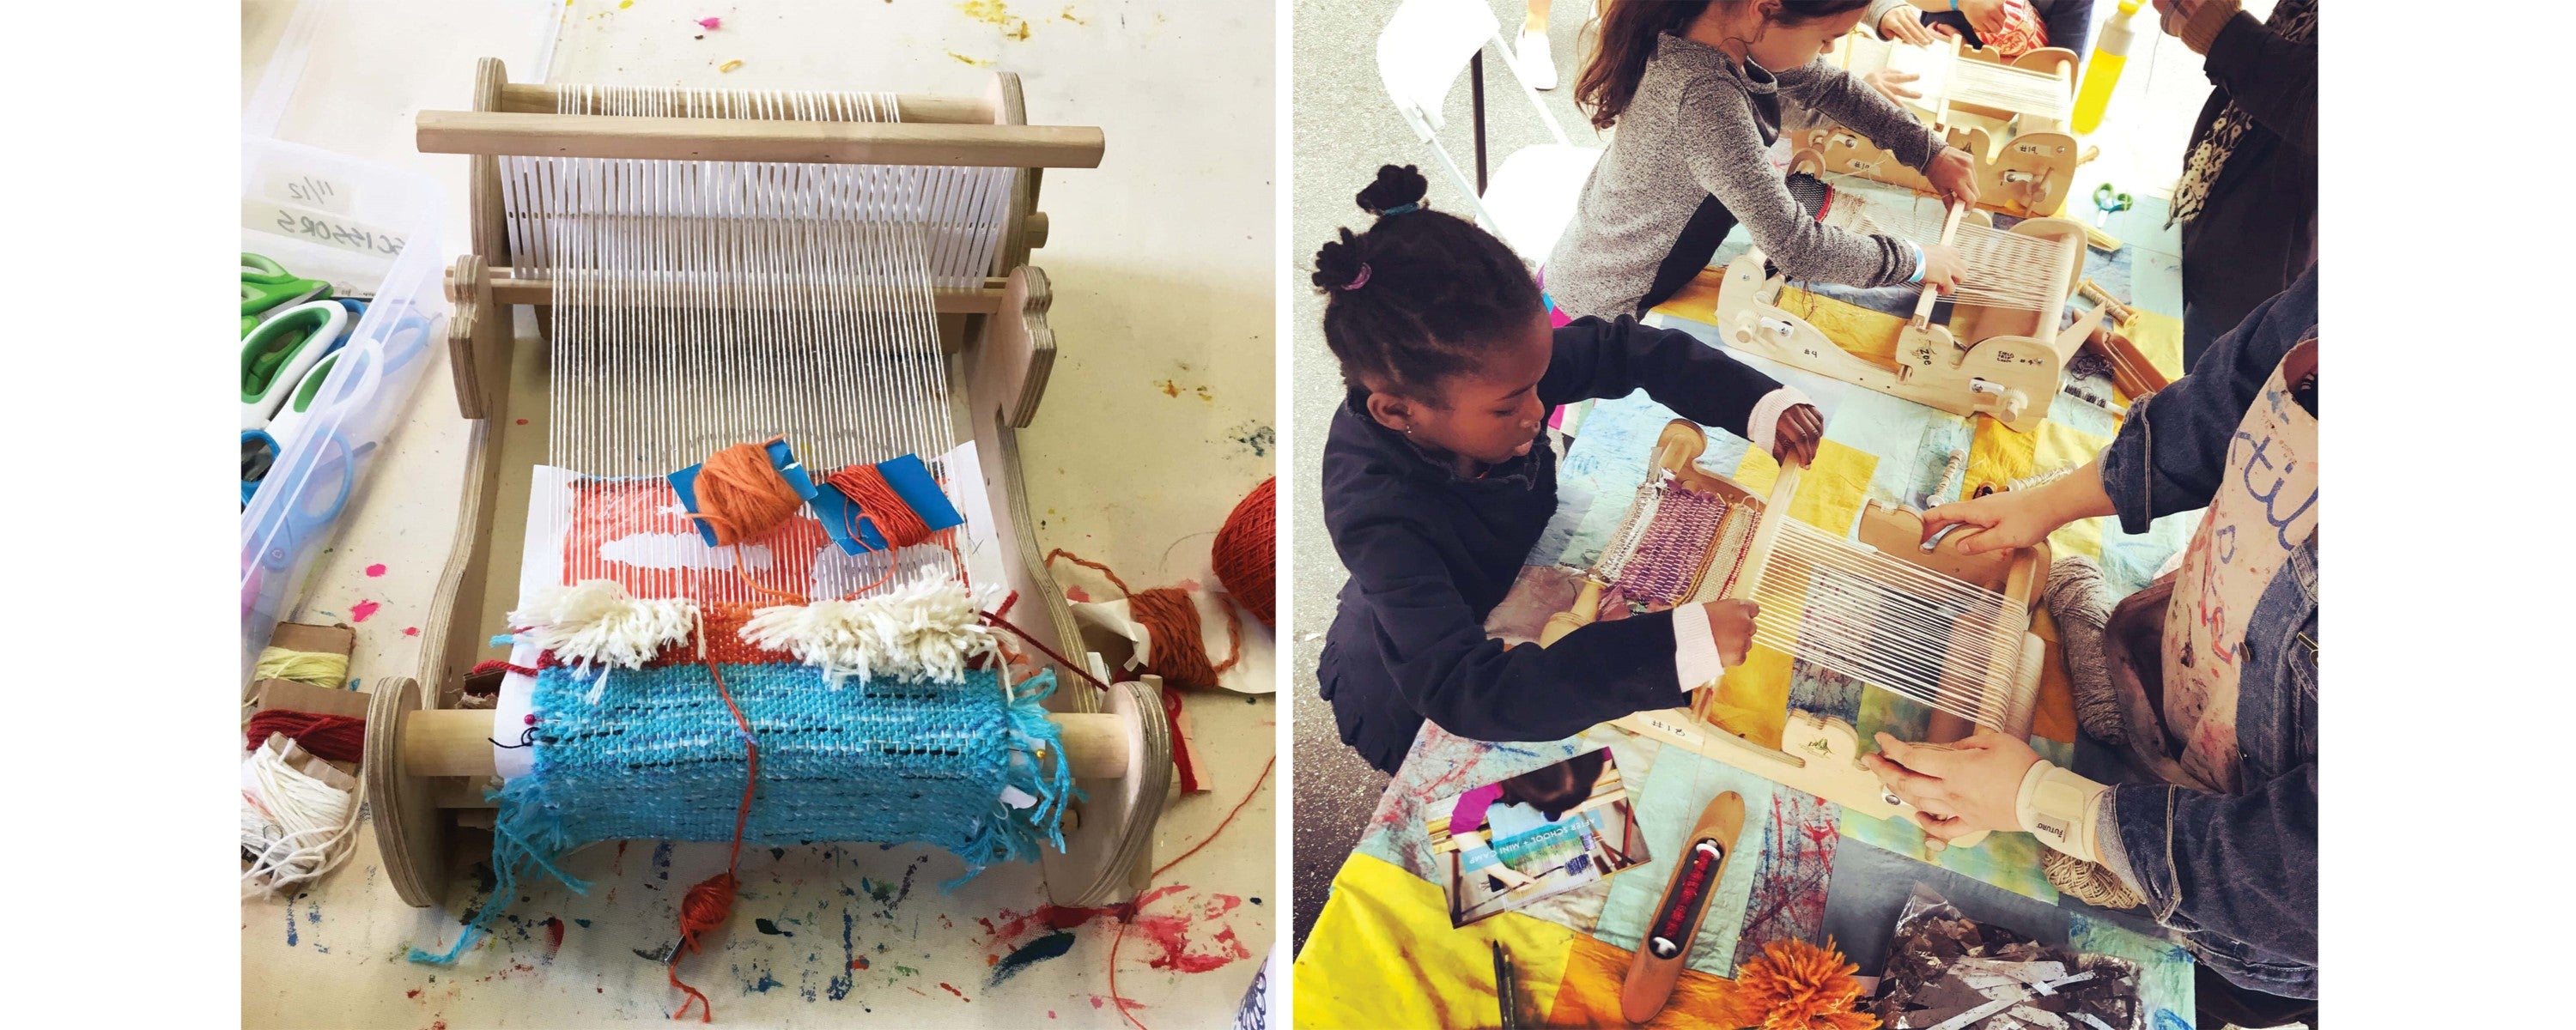 Weaving With Kids: Before & During the Pandemic